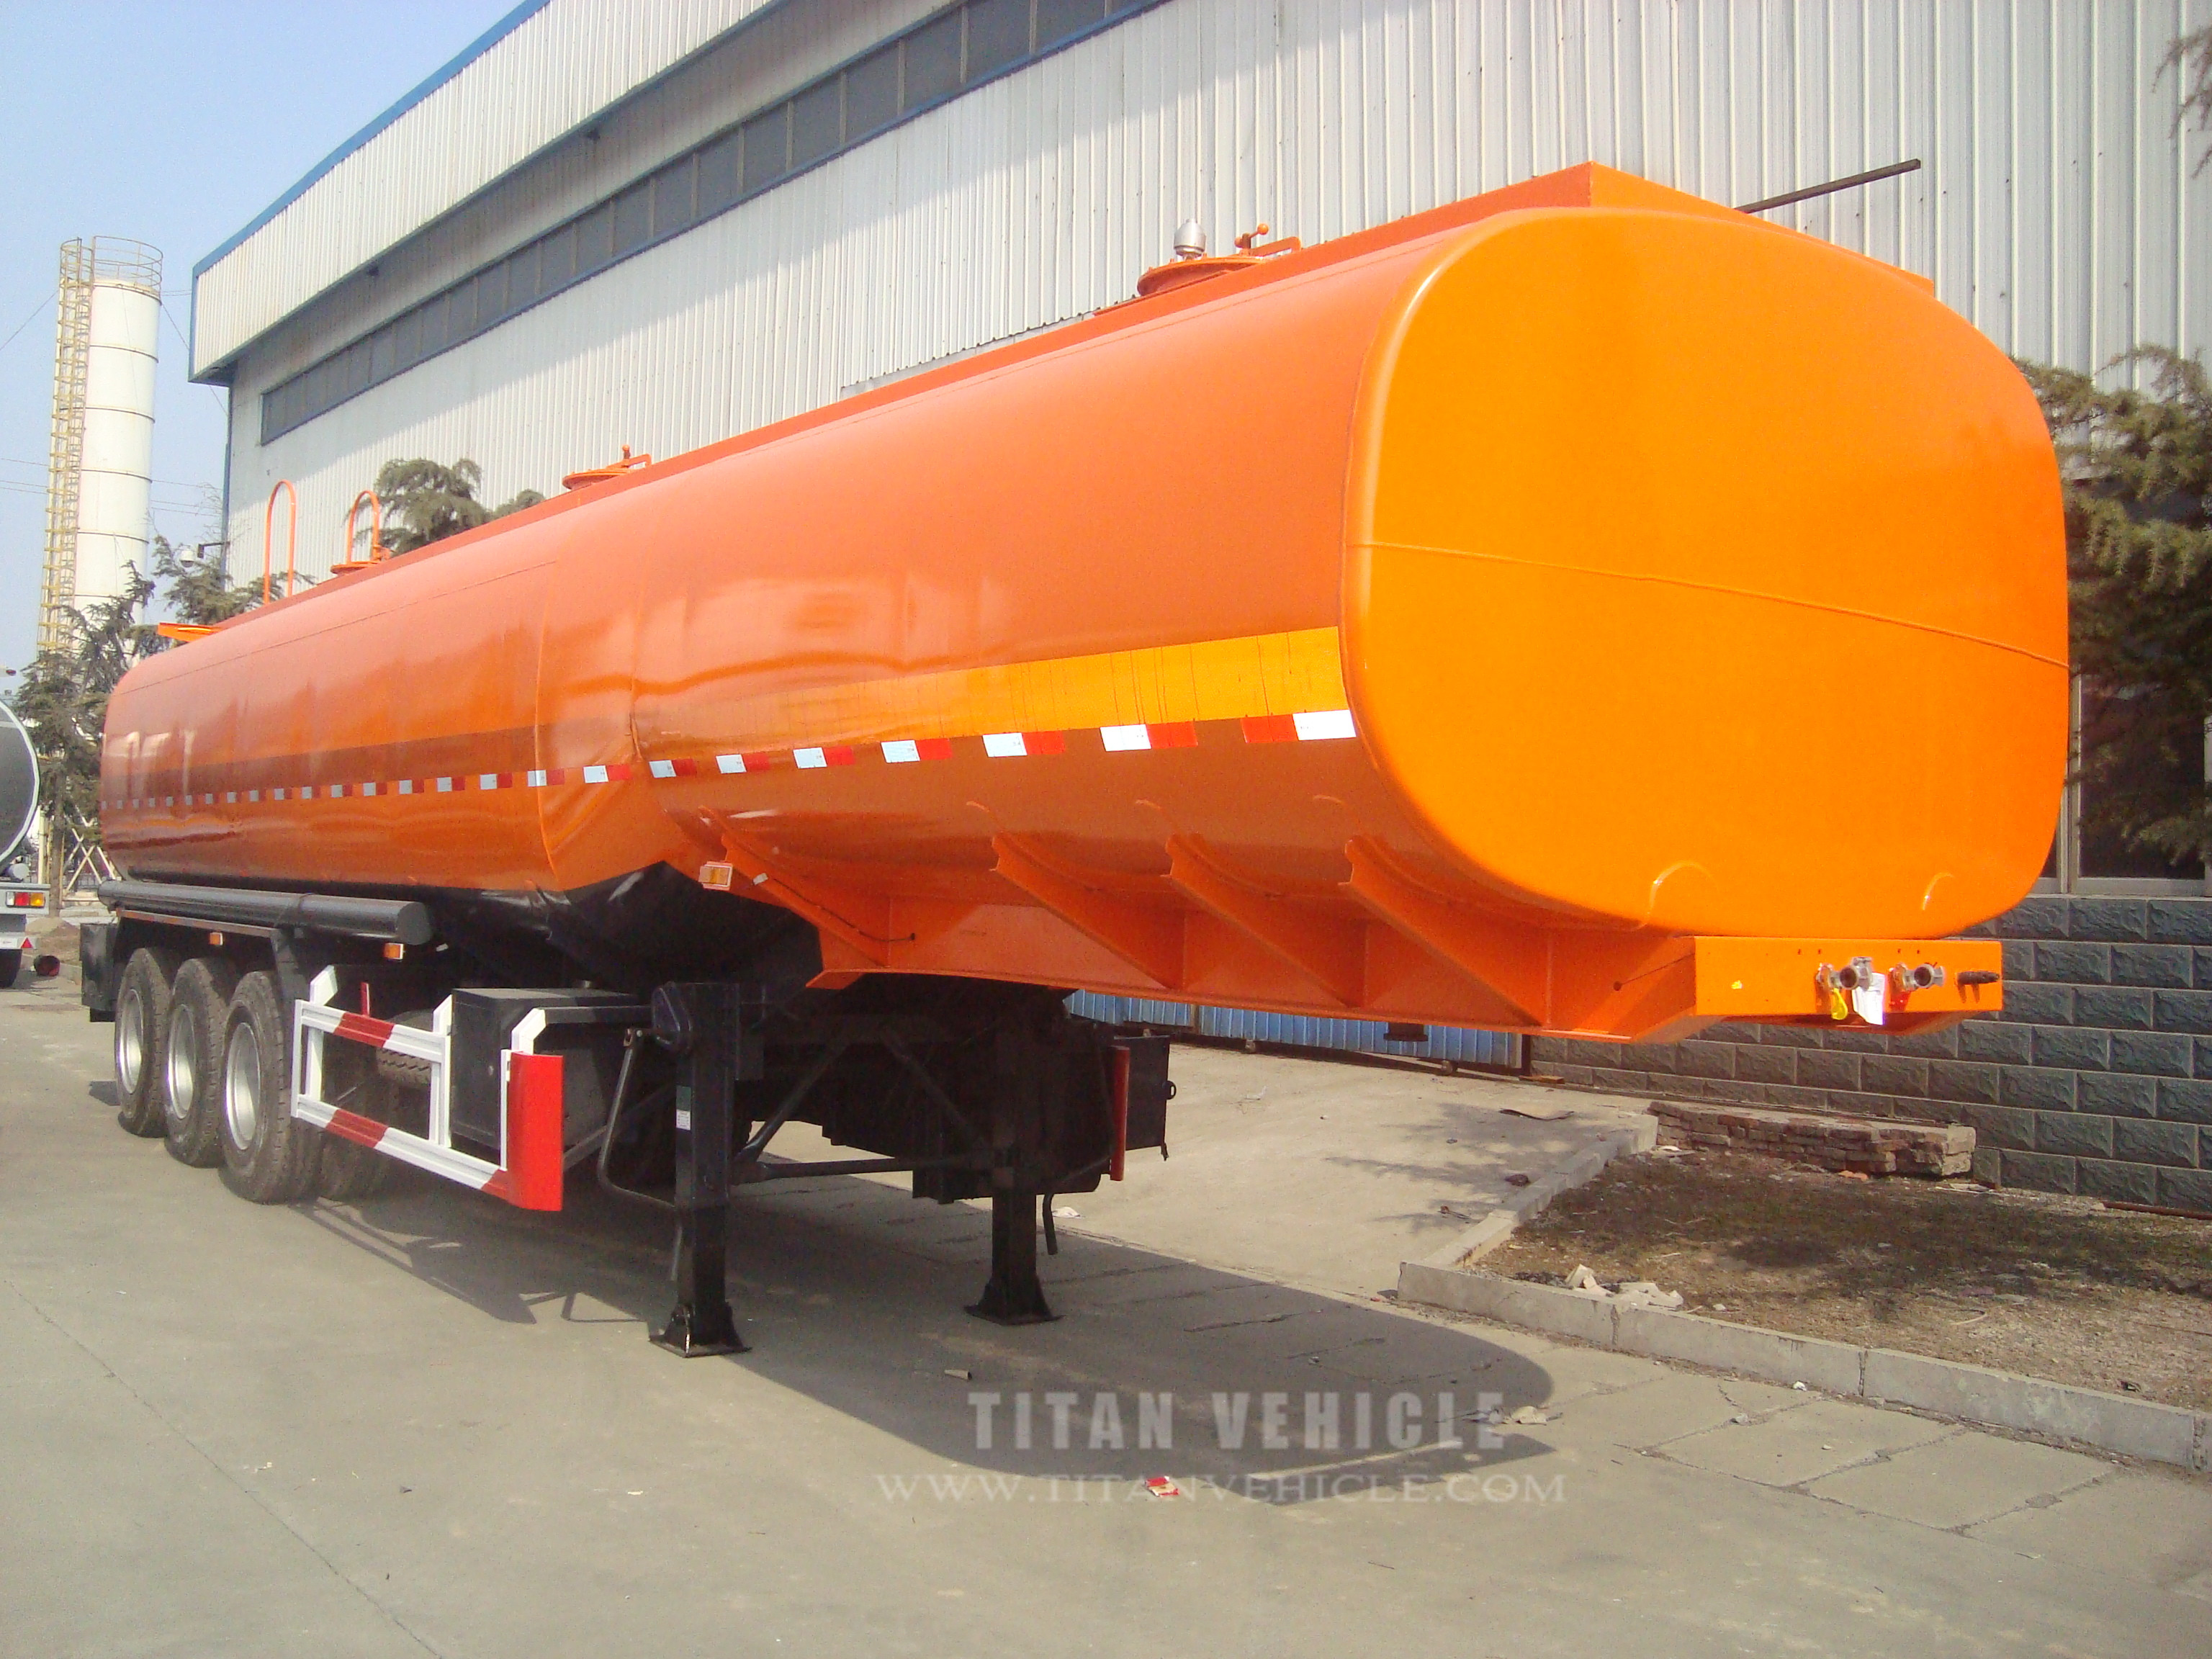 Titan produced the fuel tank trailers service trailers use the best paint spraying, with strong adhesion, overall beauty and corrosion resistance.